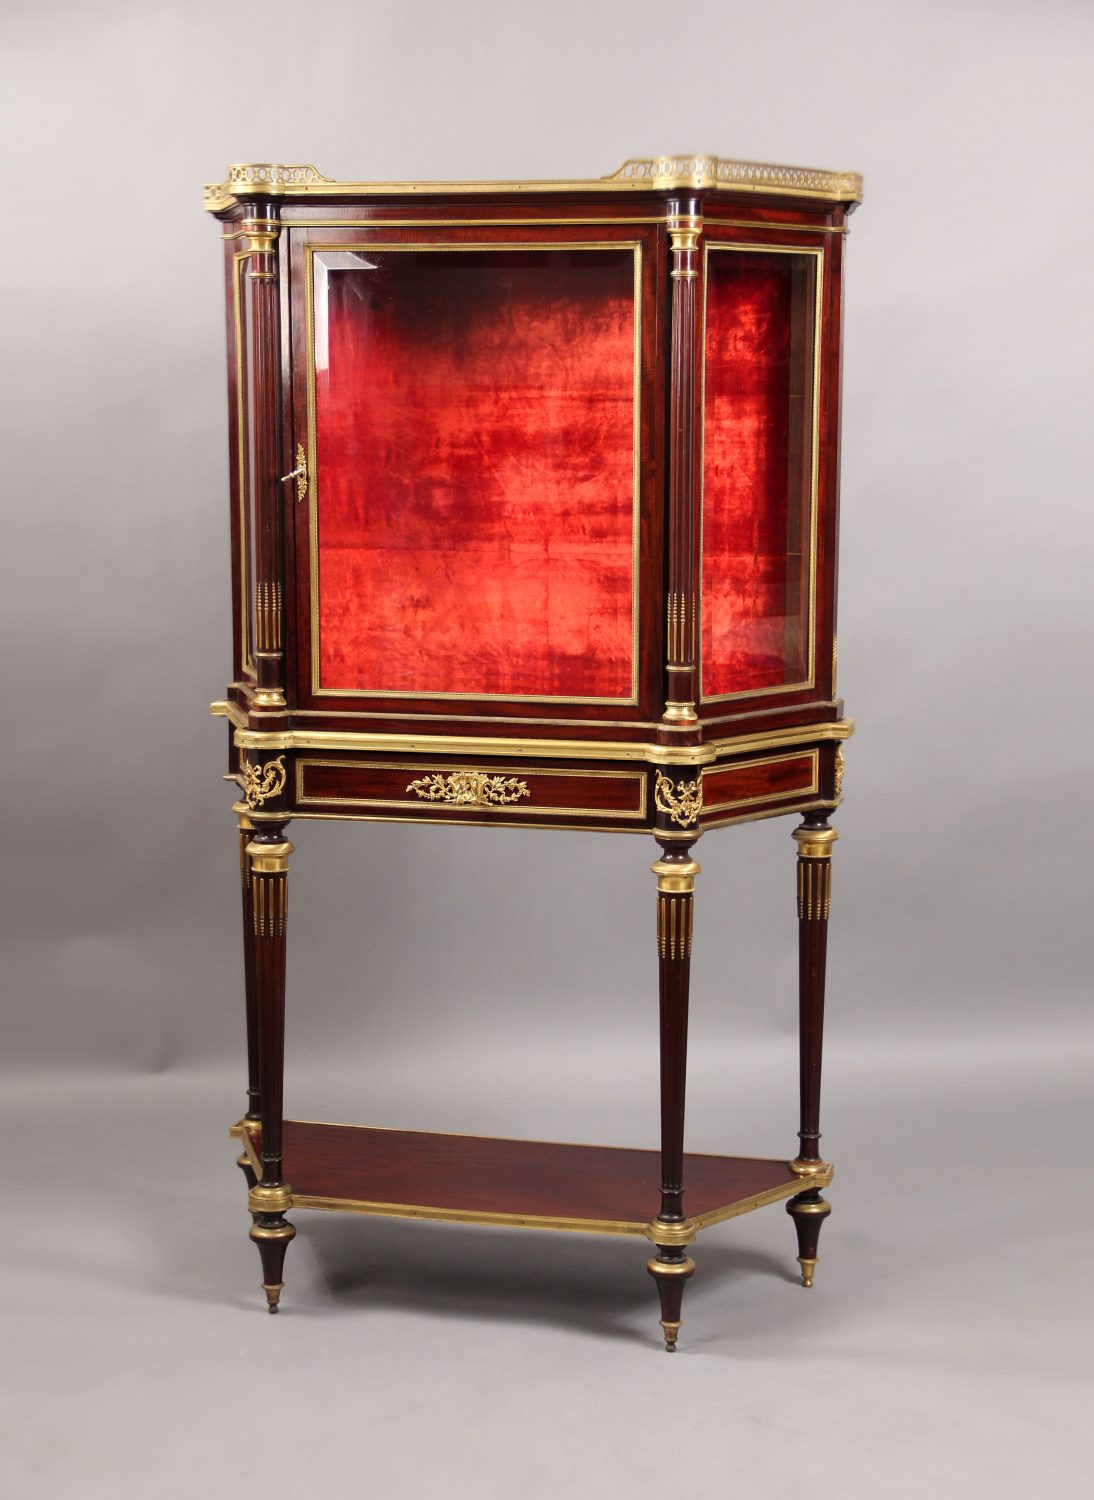 Late 19th Century Gilt Bronze Mounted Louis XVI Style Antique French Vitrine By Paul Sormani